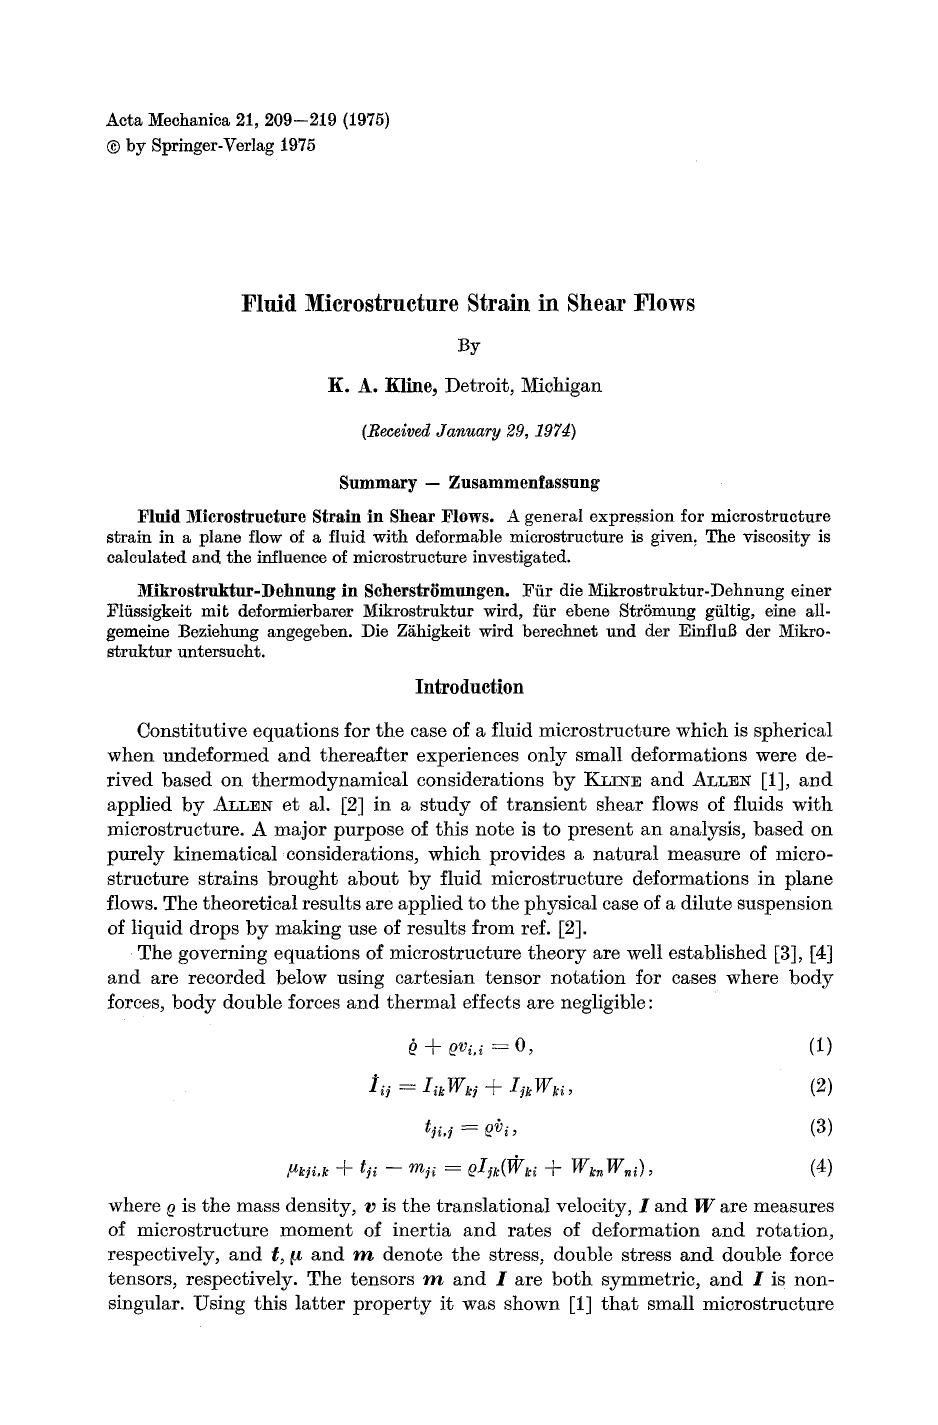 Fluid microstructure strain in shear flows by Unknown